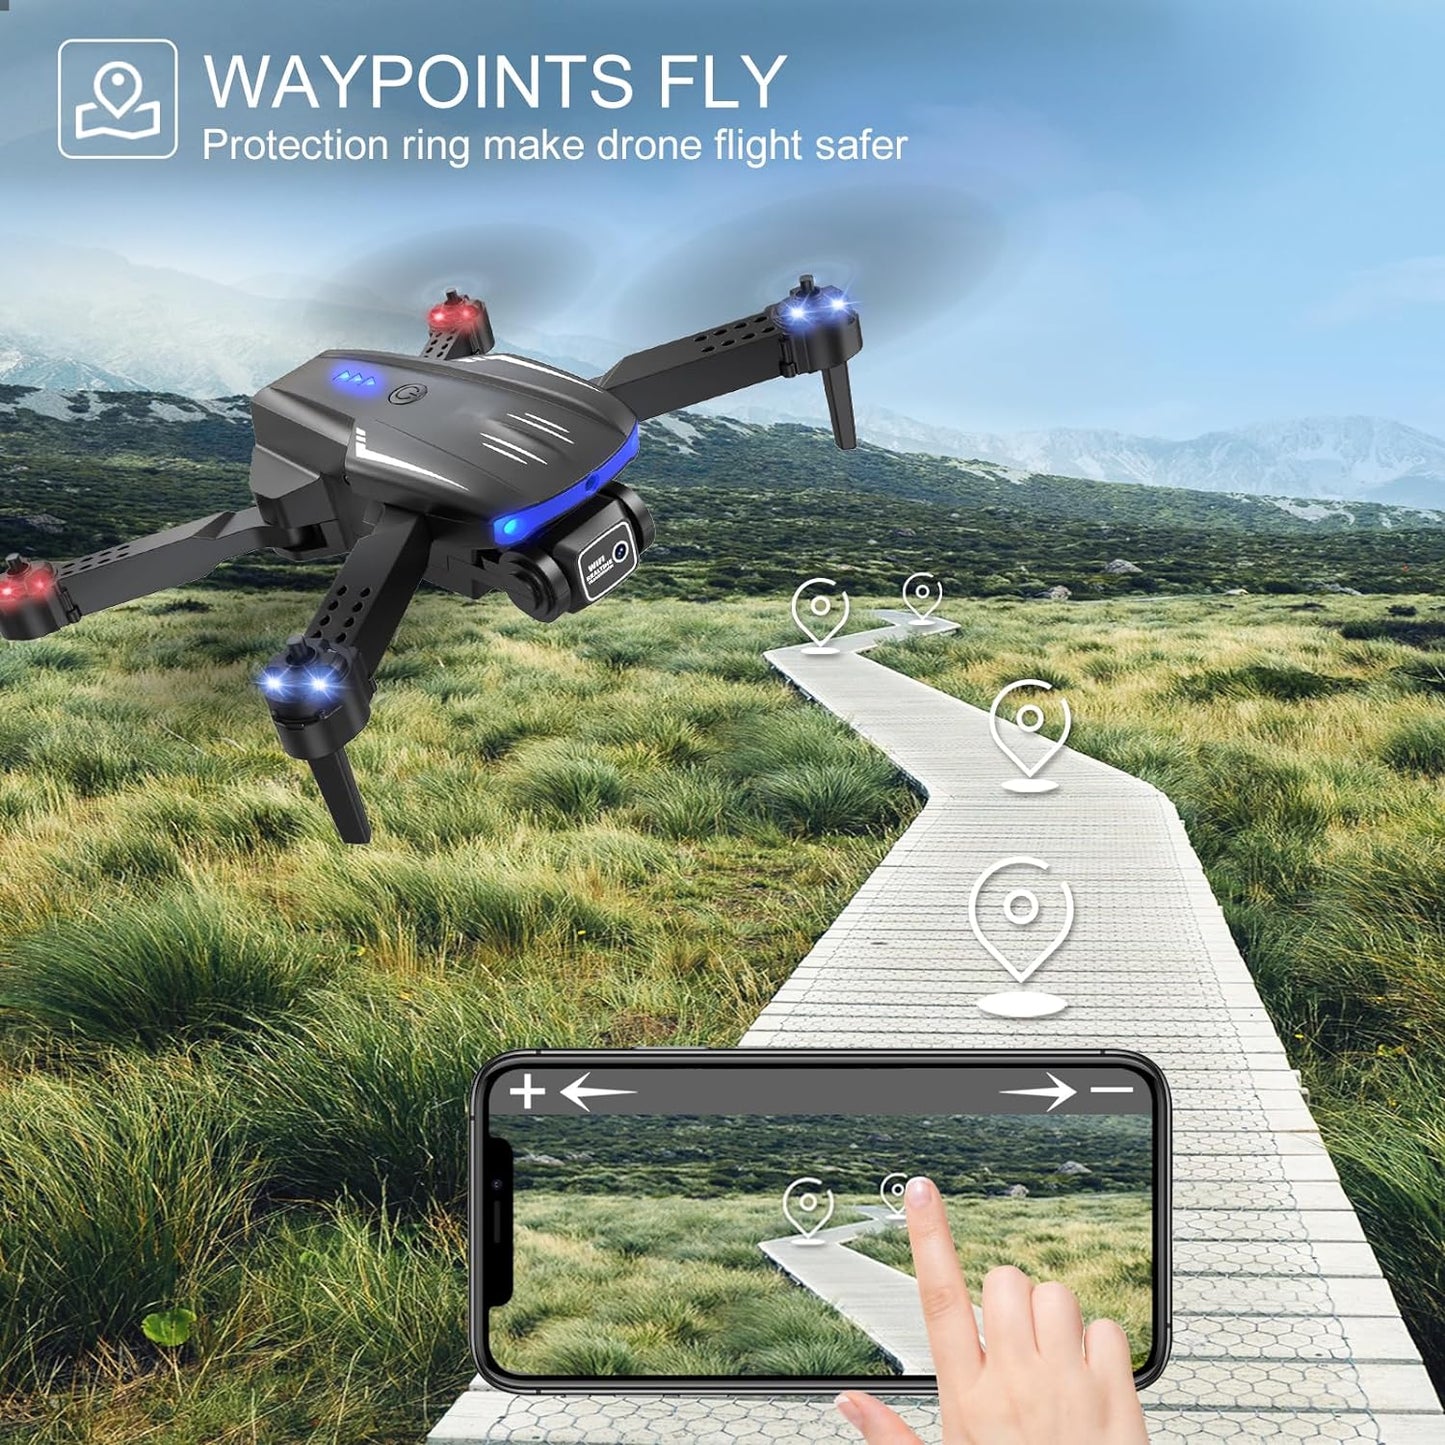 X-shop LDG006 Drone, WAYPOINTS FLY Protection make drone flight safer 